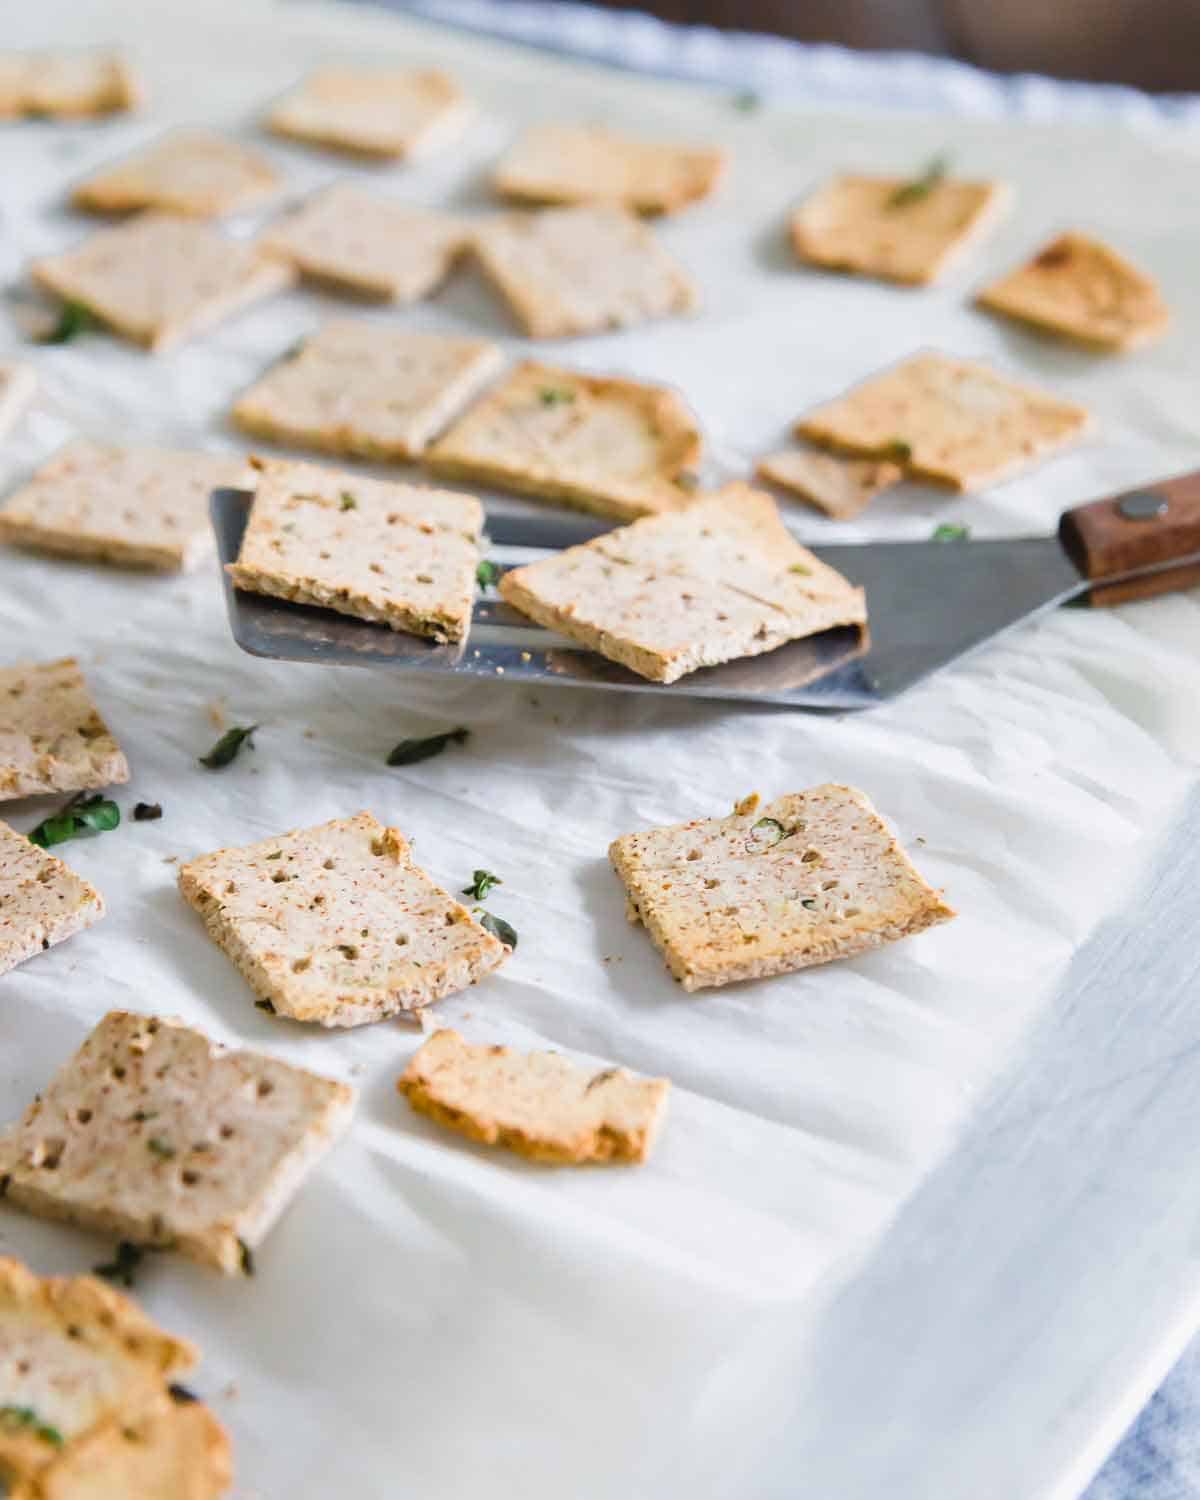 Crispy vegan almond pulp crackers with fresh herbs are a great way to use up leftover almond pulp from making nut milk at home.